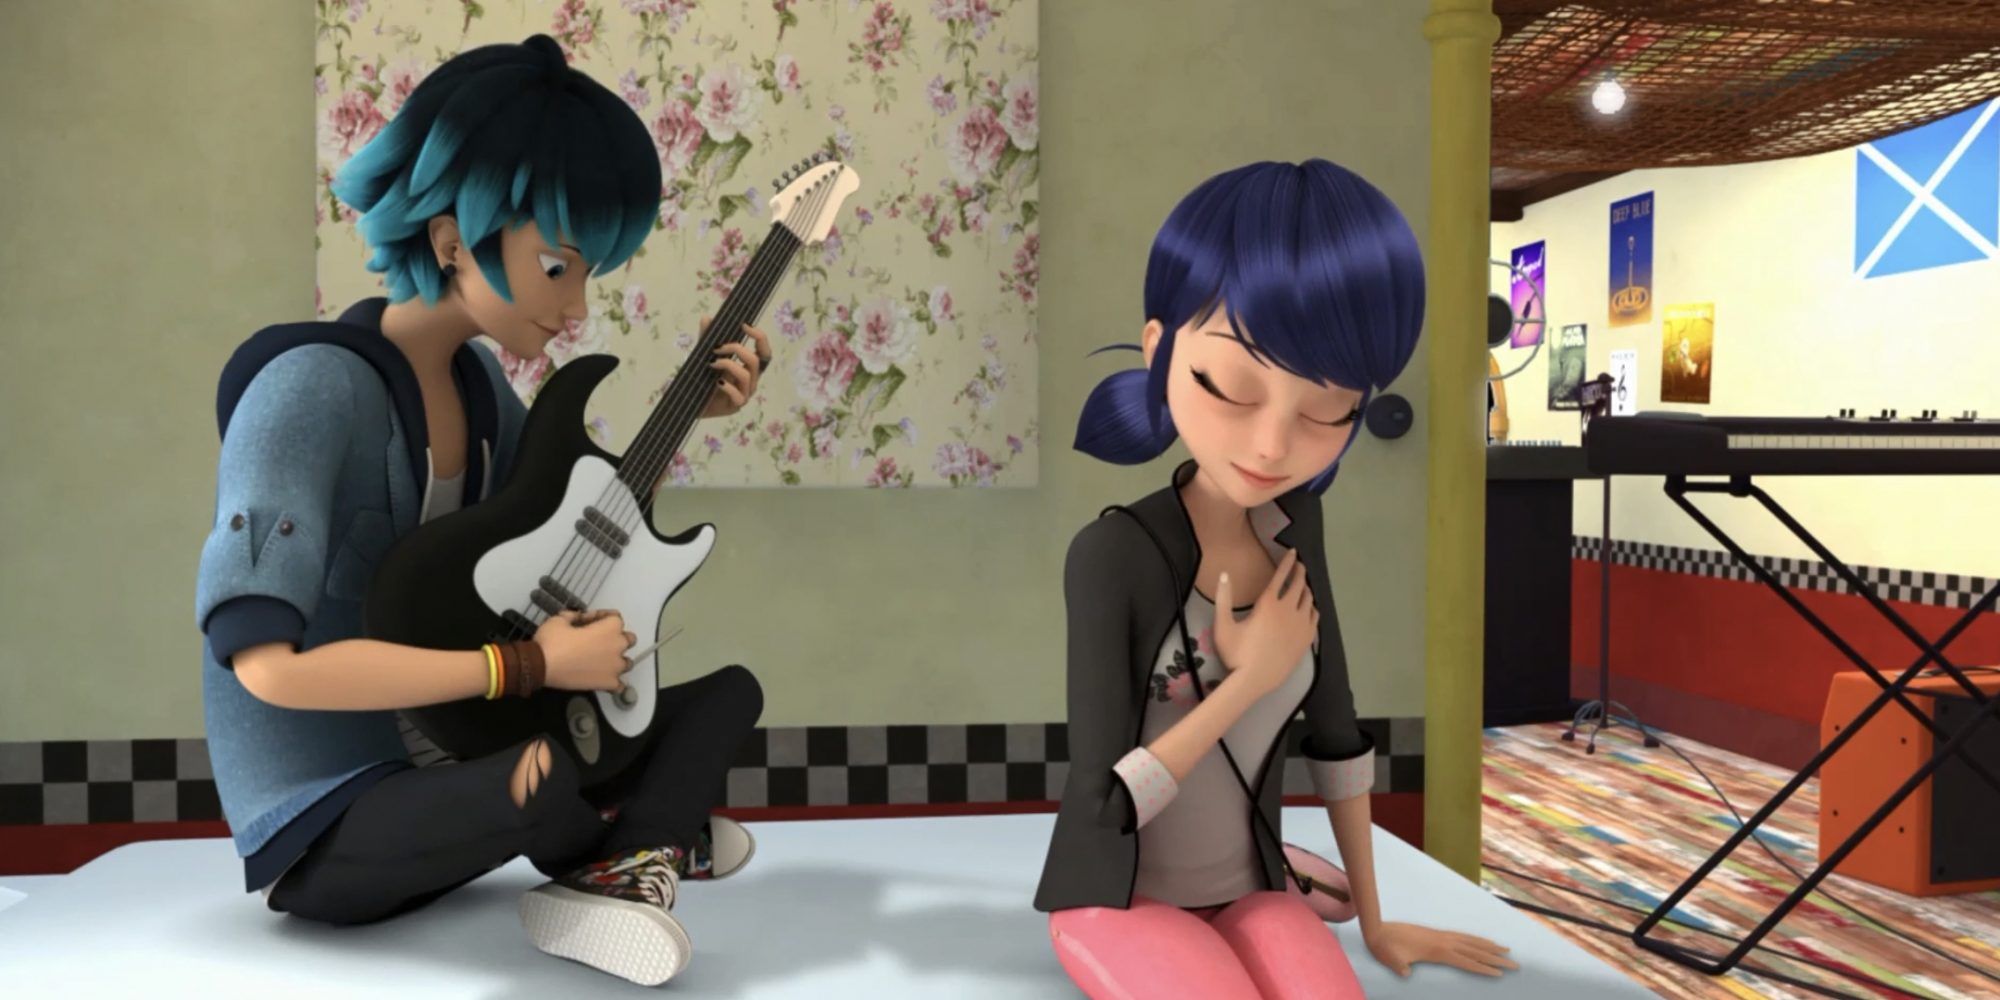 Luka plays his guitar while Marinette listens in Miraculous Ladybug